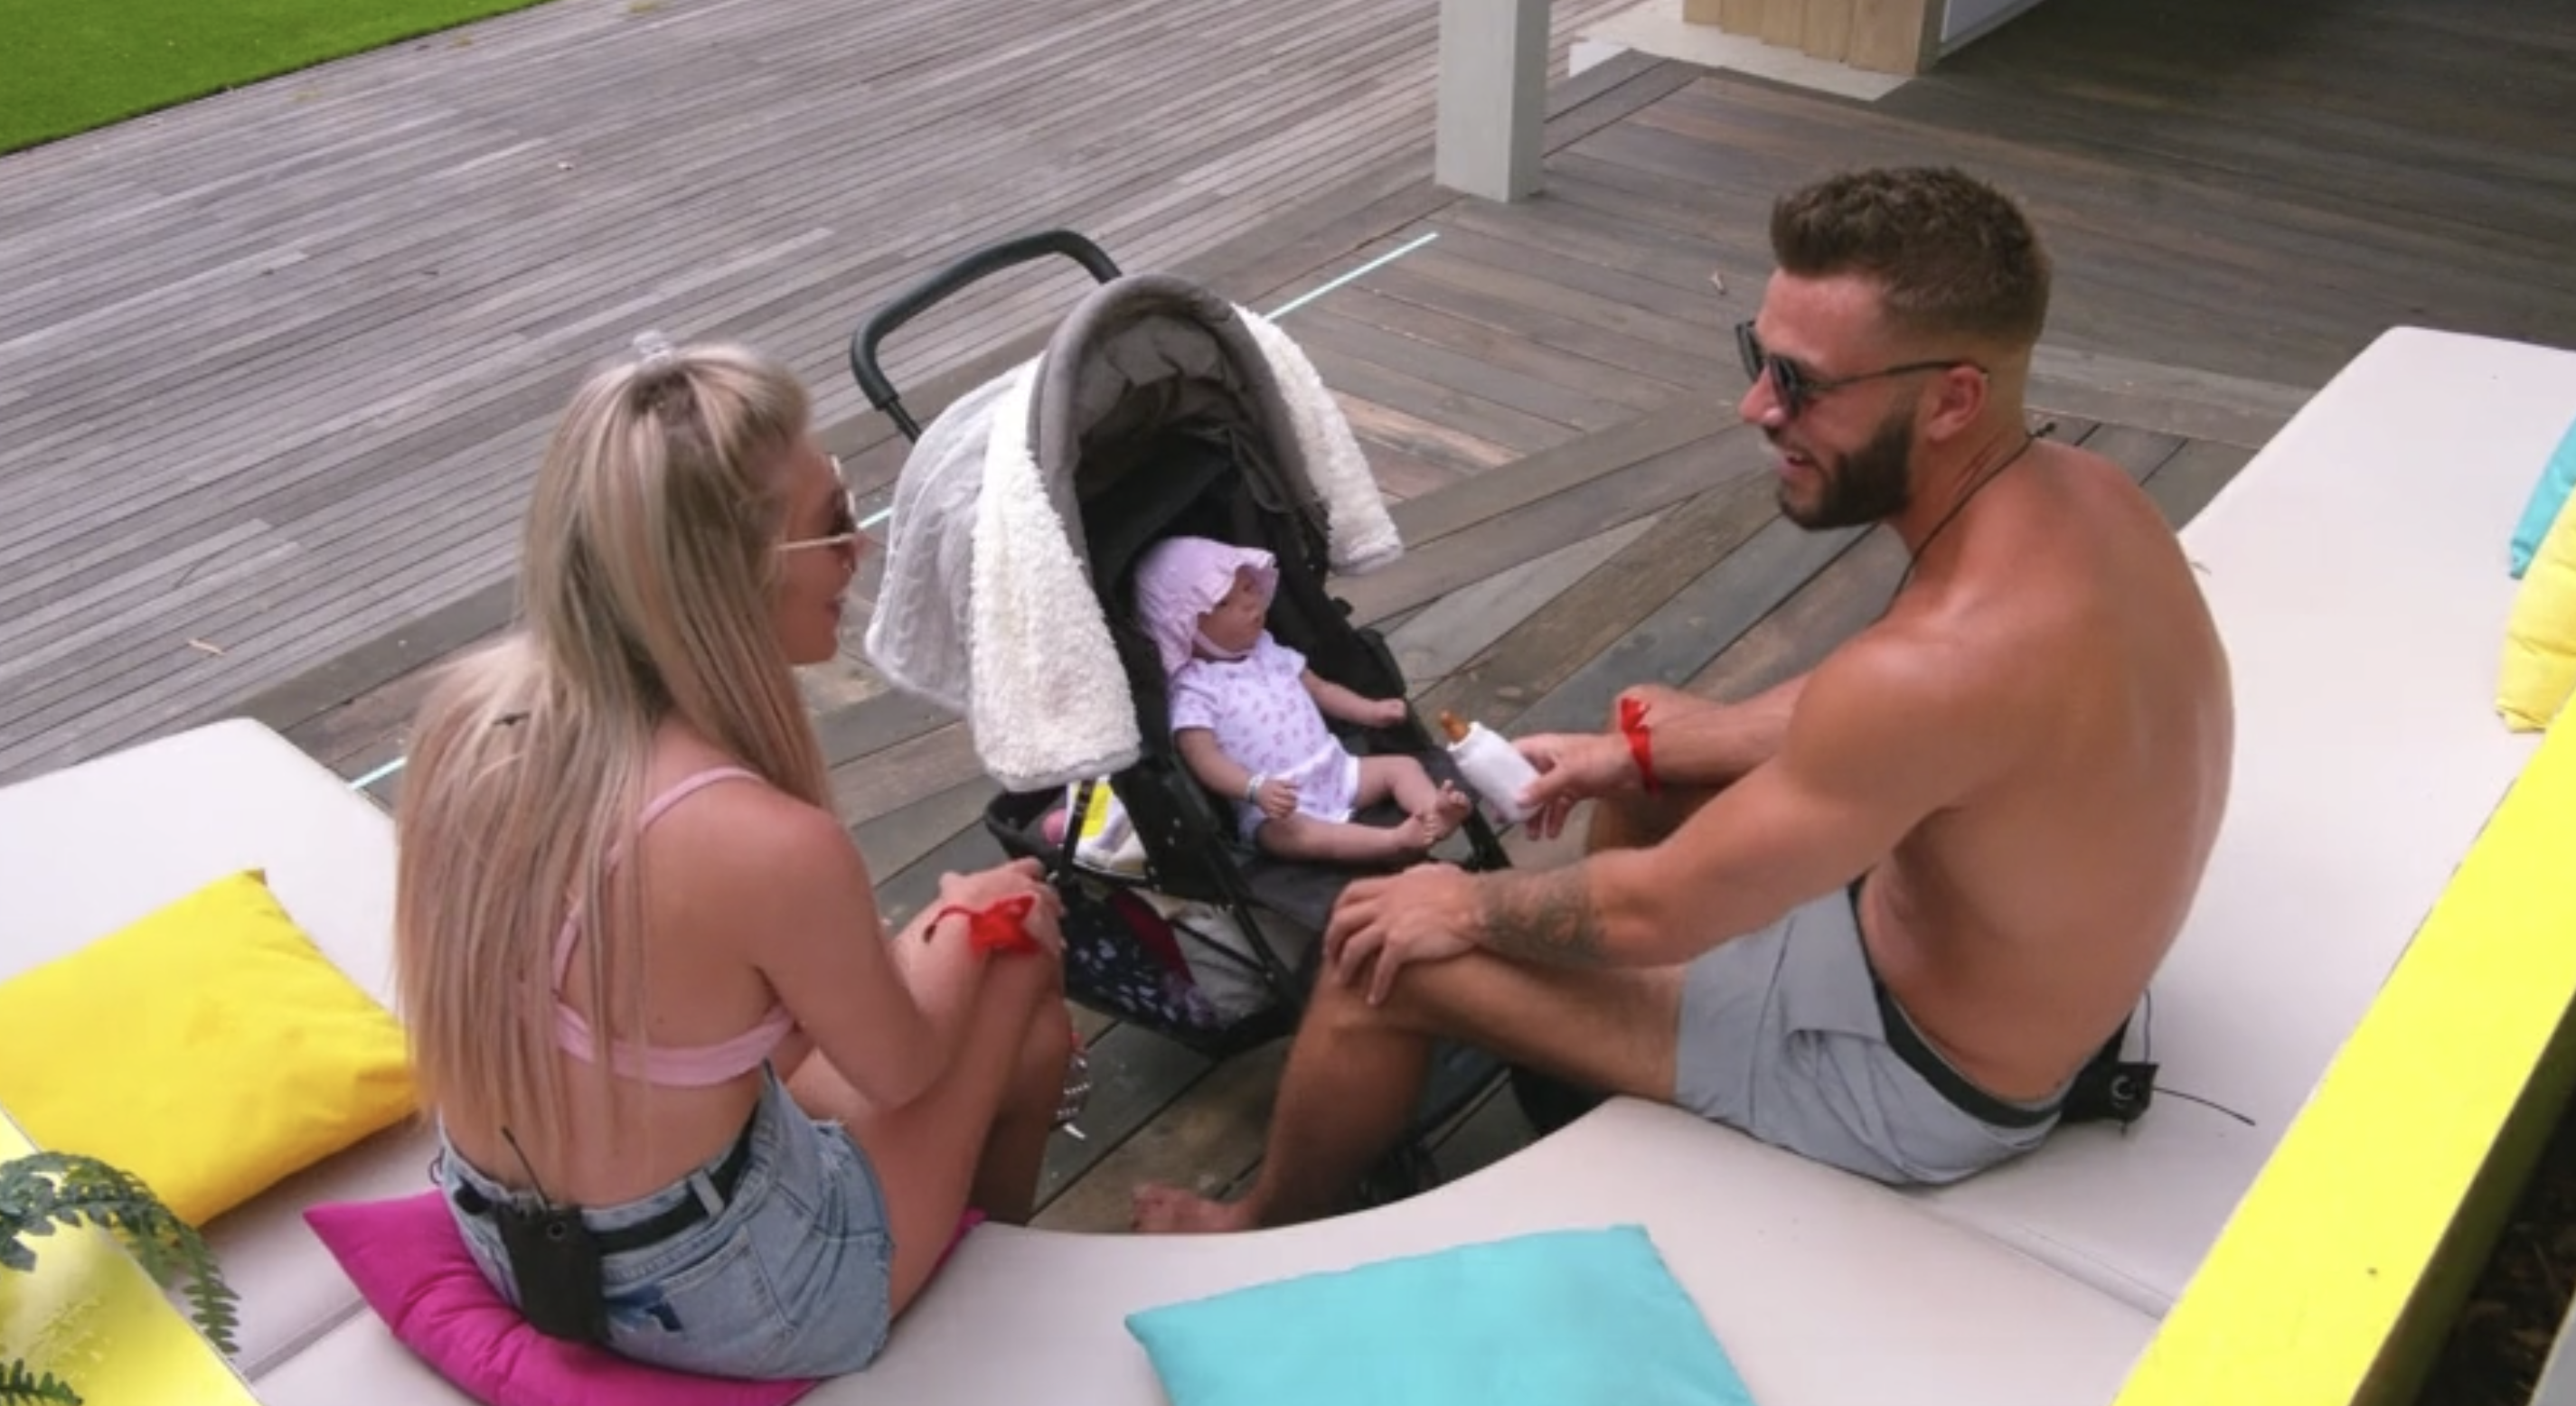 Love Island: Why were ribbons worn during the baby challenge?